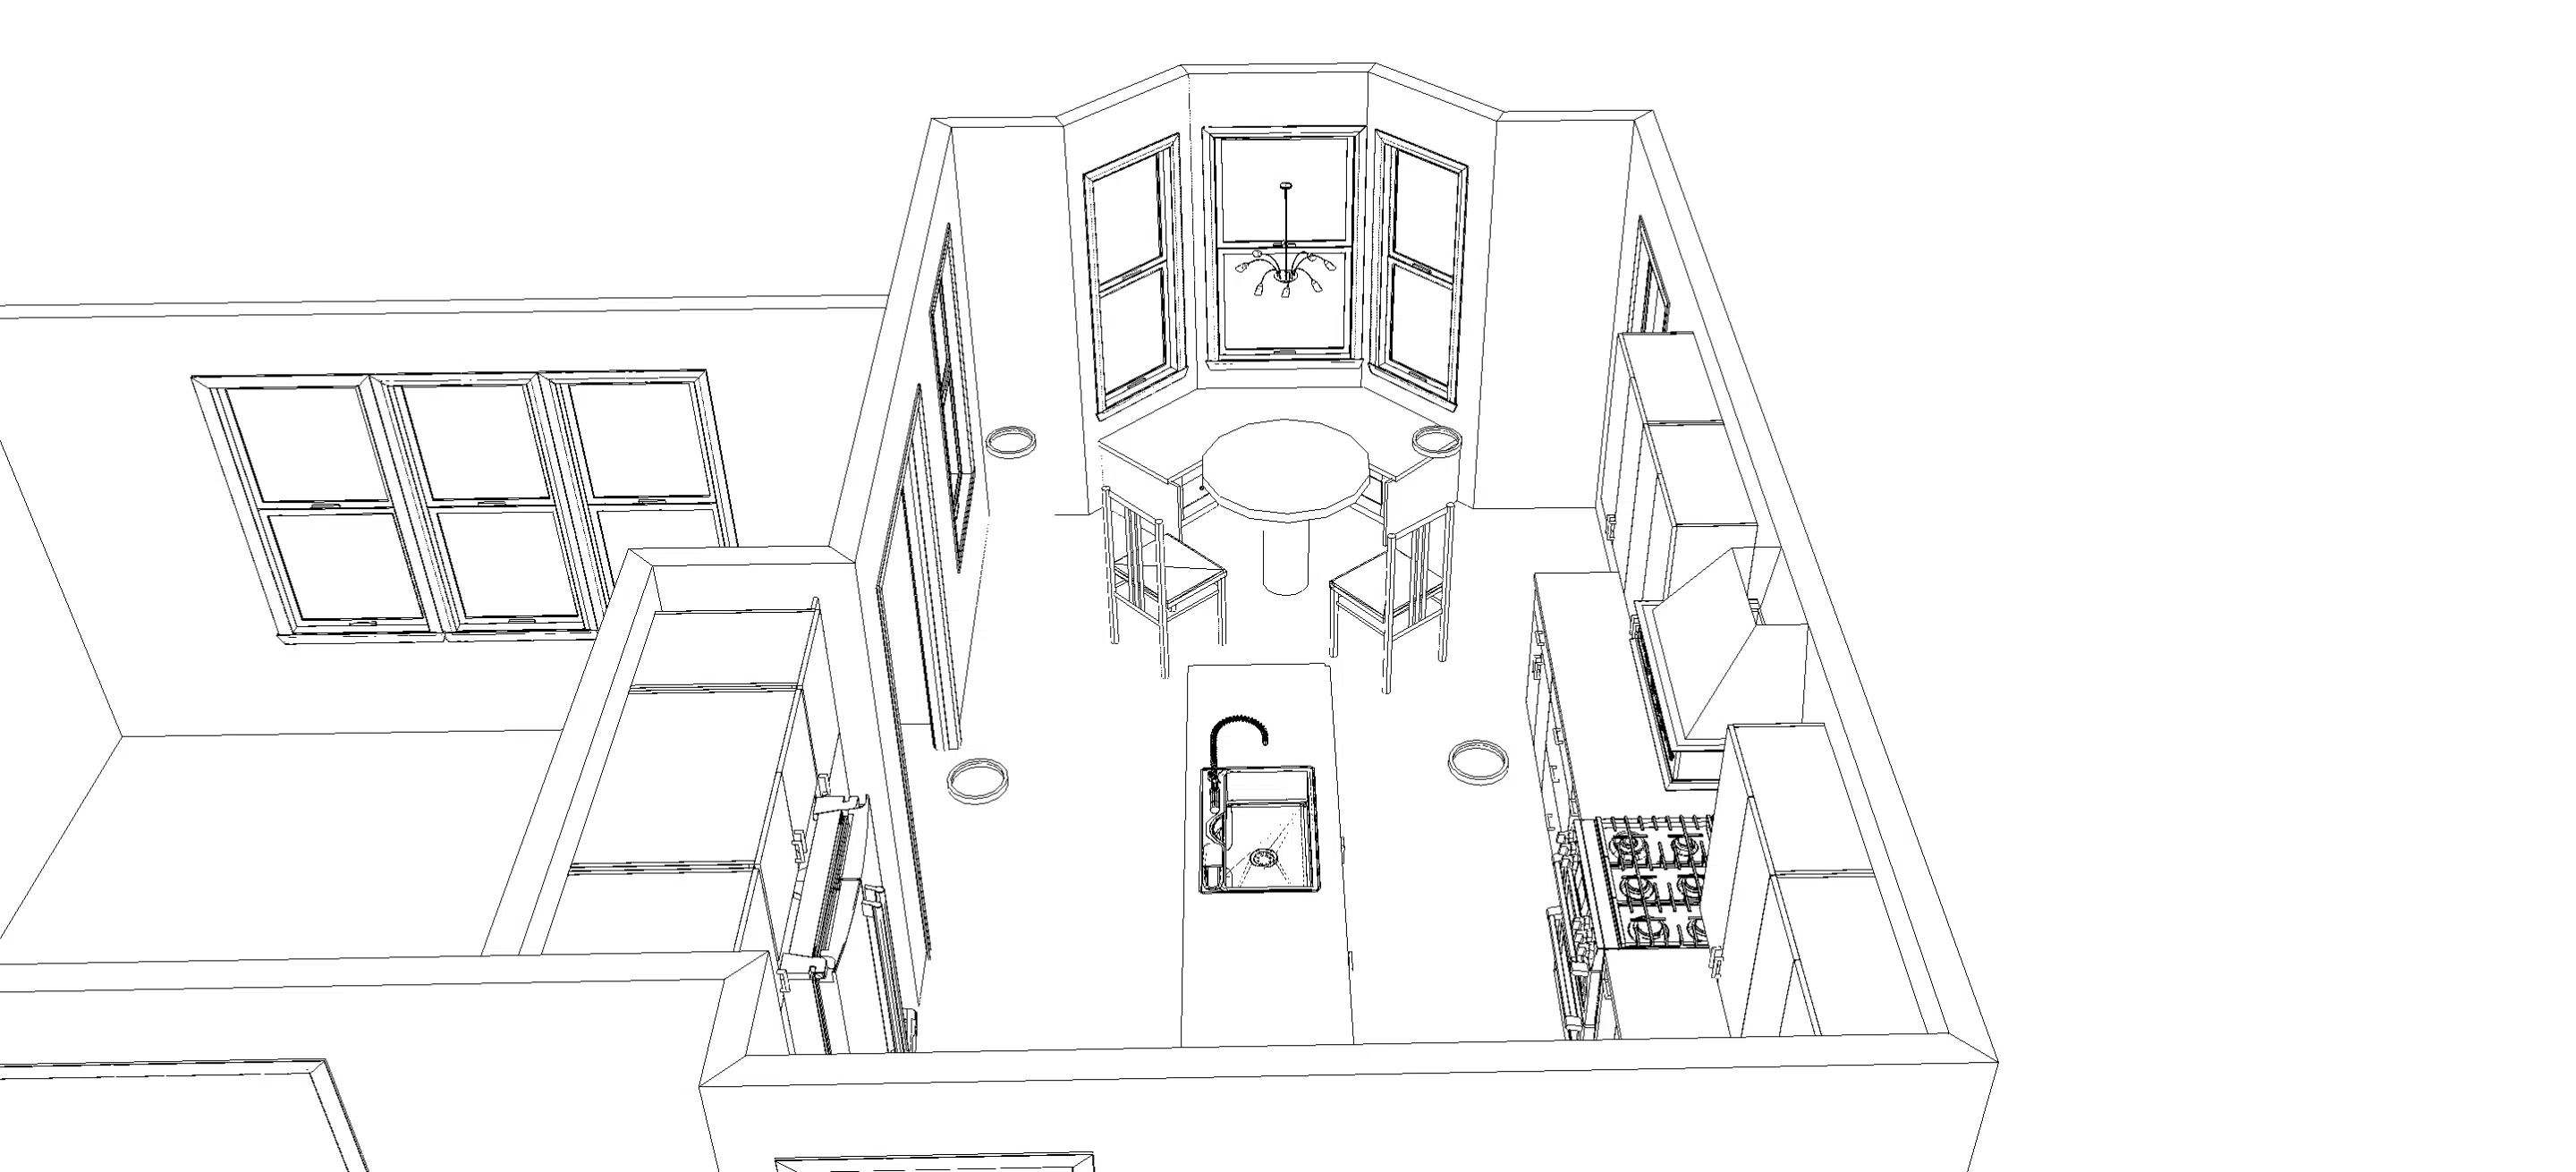 initial concept for family kitchen